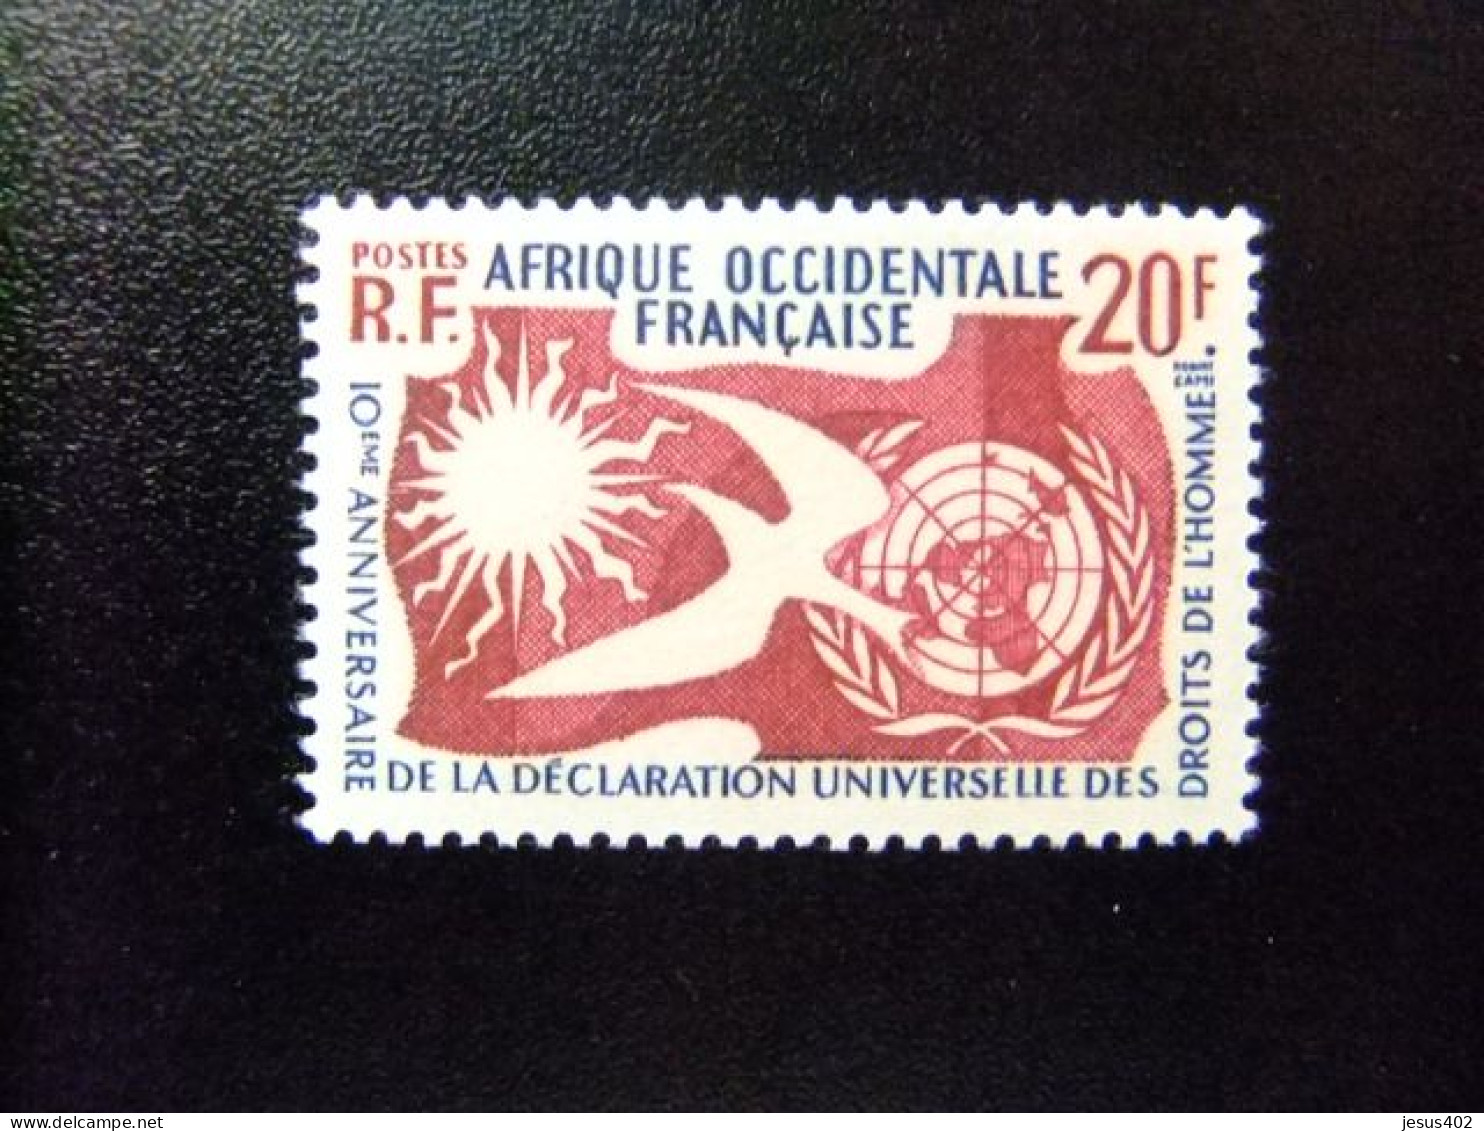 56 AFRIQUE OCCIDENTALE FRANCAISE (A.O.F.) 1958 / O.N.U. / YVERT 74 MNH - Unused Stamps